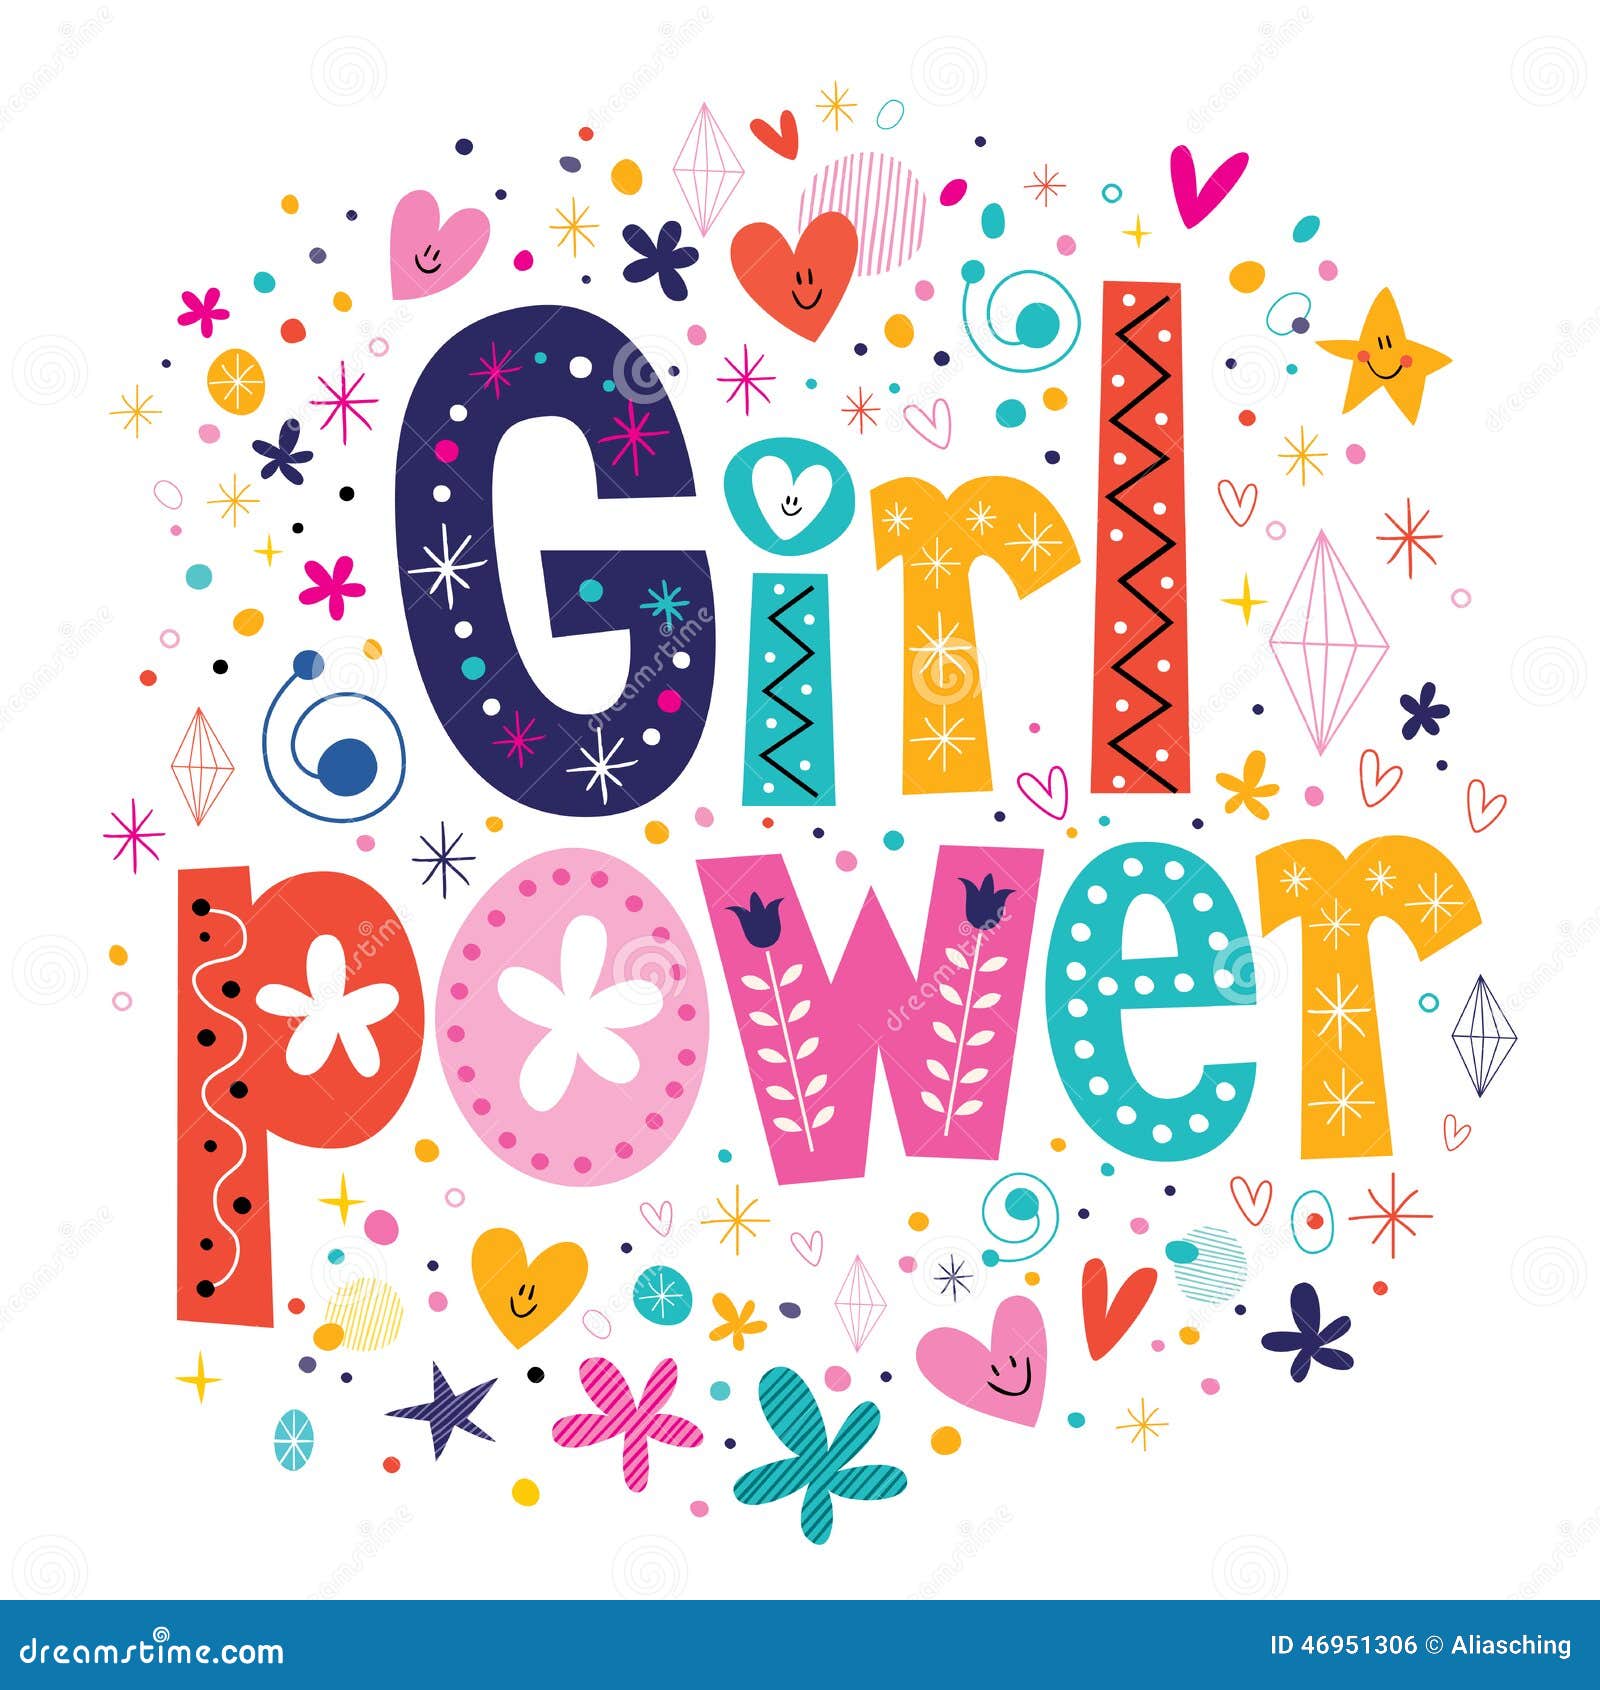 free girl power clipart - photo #3